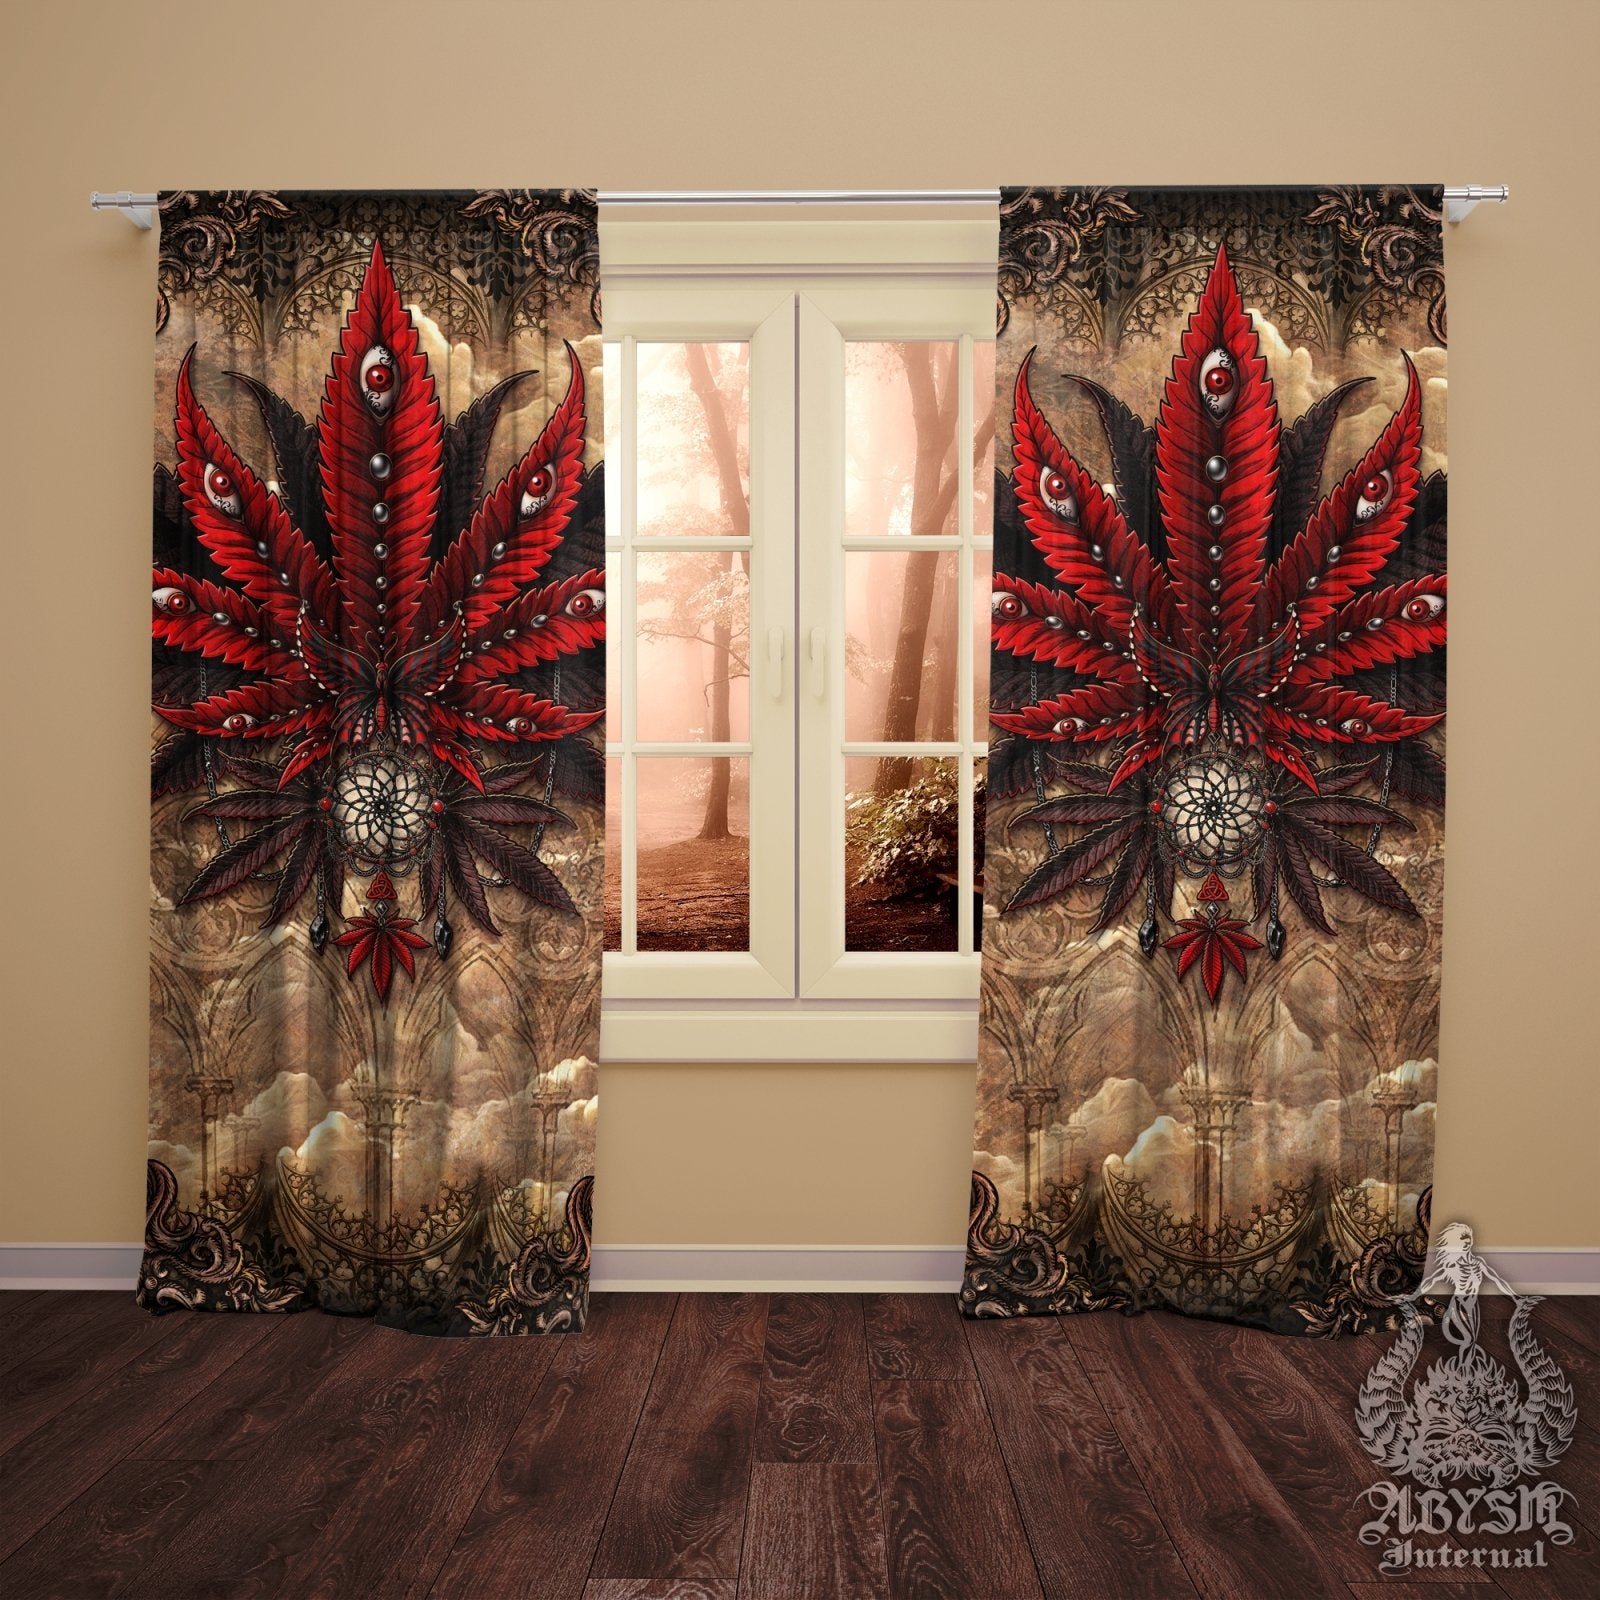 Gothic Weed Blackout Curtains, Cannabis Home and Shop Decor, Long Window Panels, Indie 420 Room Art Print - Horror Beige - Abysm Internal